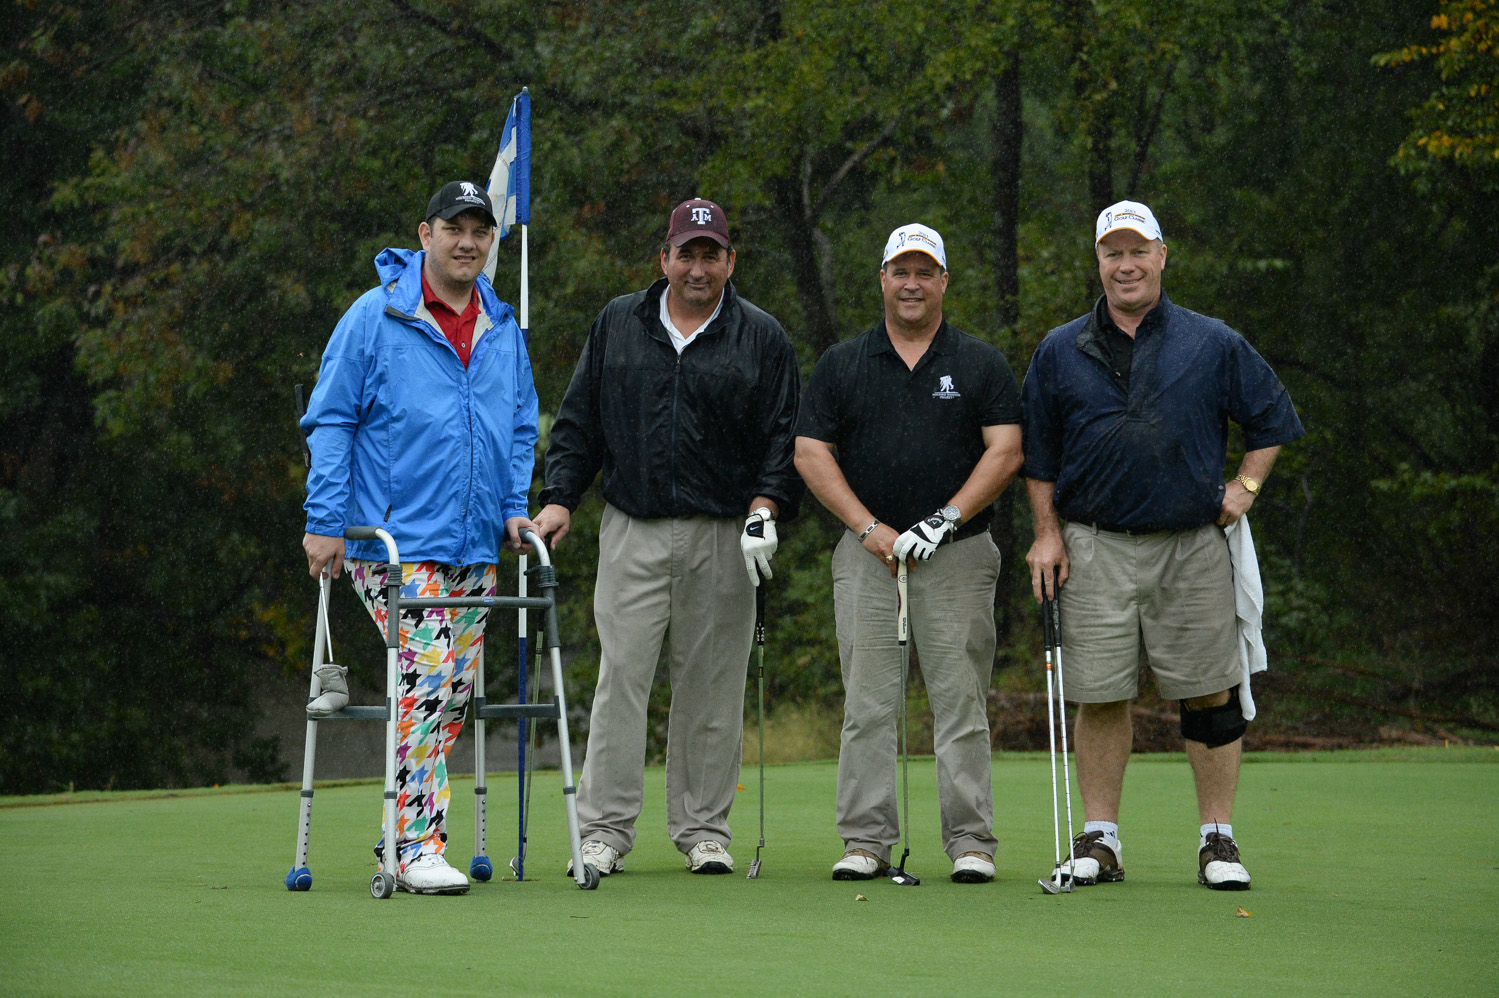 The 2013 AUSA Wounded Warrior Golf Classic was held October 14 at Firewheel Golf Park, one of the Dallas area’s premier public golf complexes.